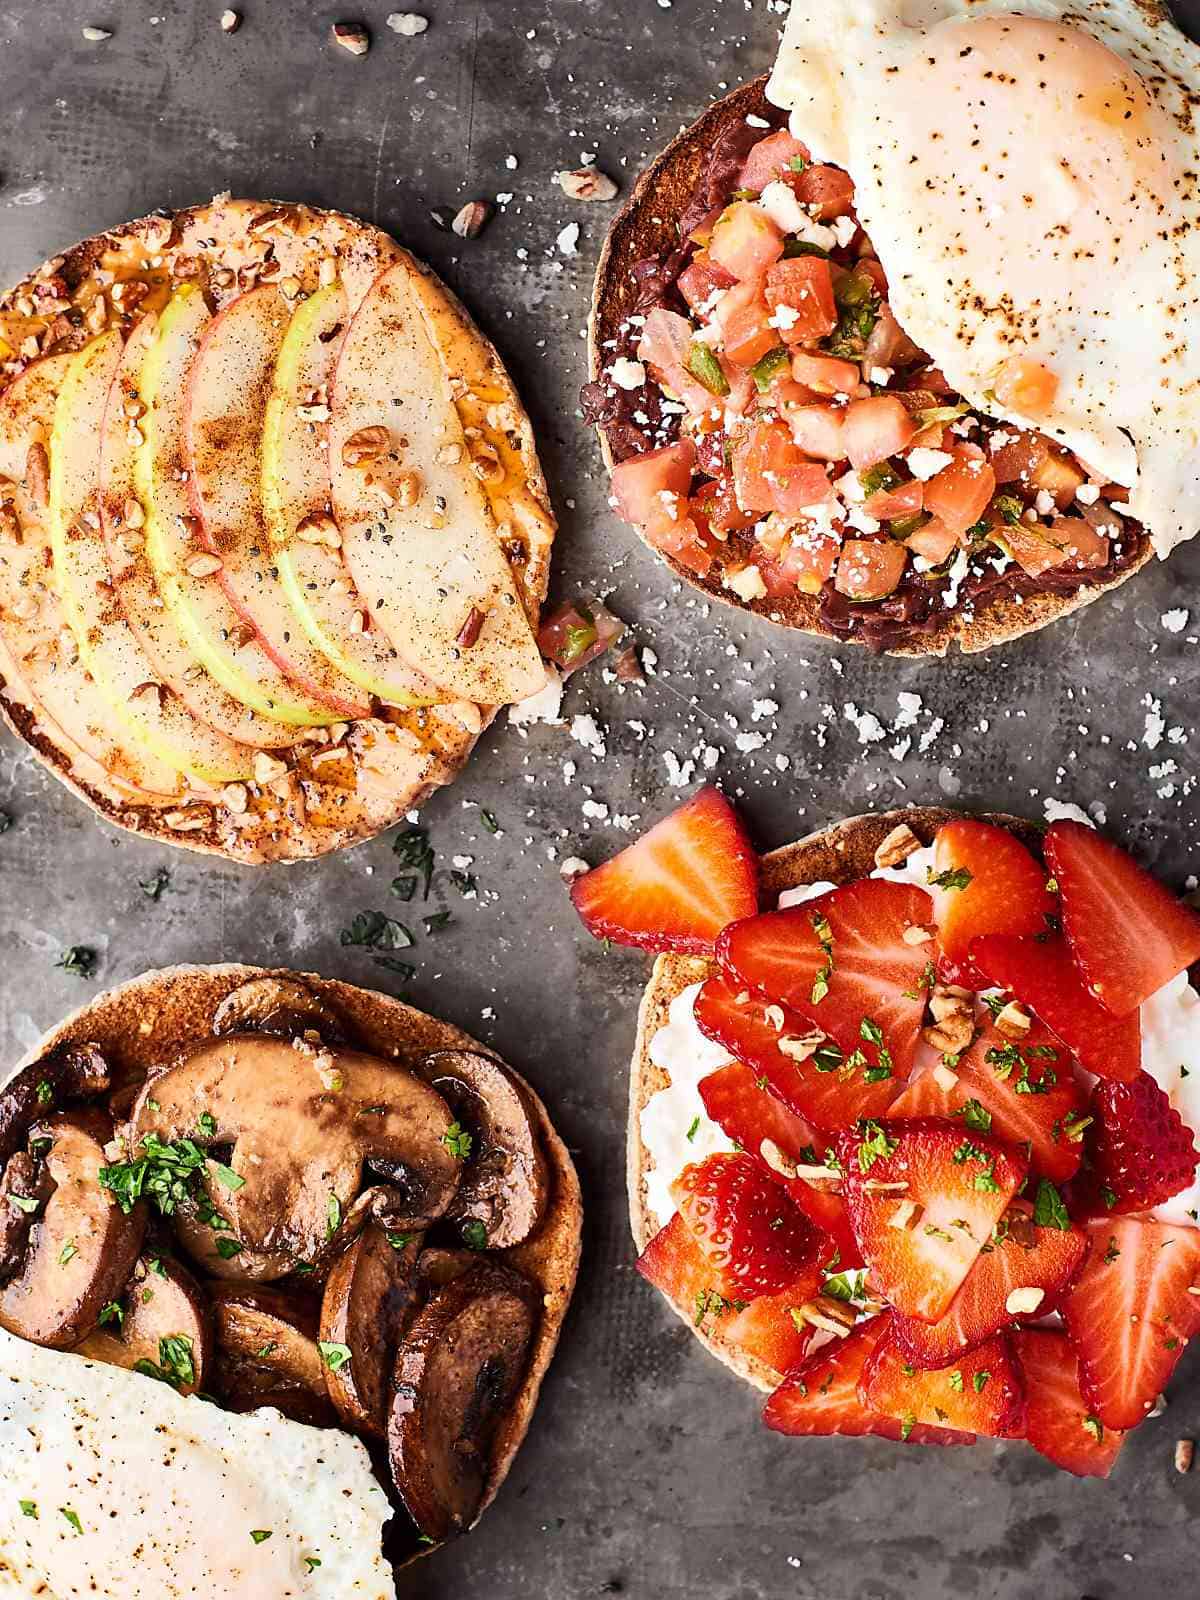 Healthy Toast Recipes Sweet And Savory Options